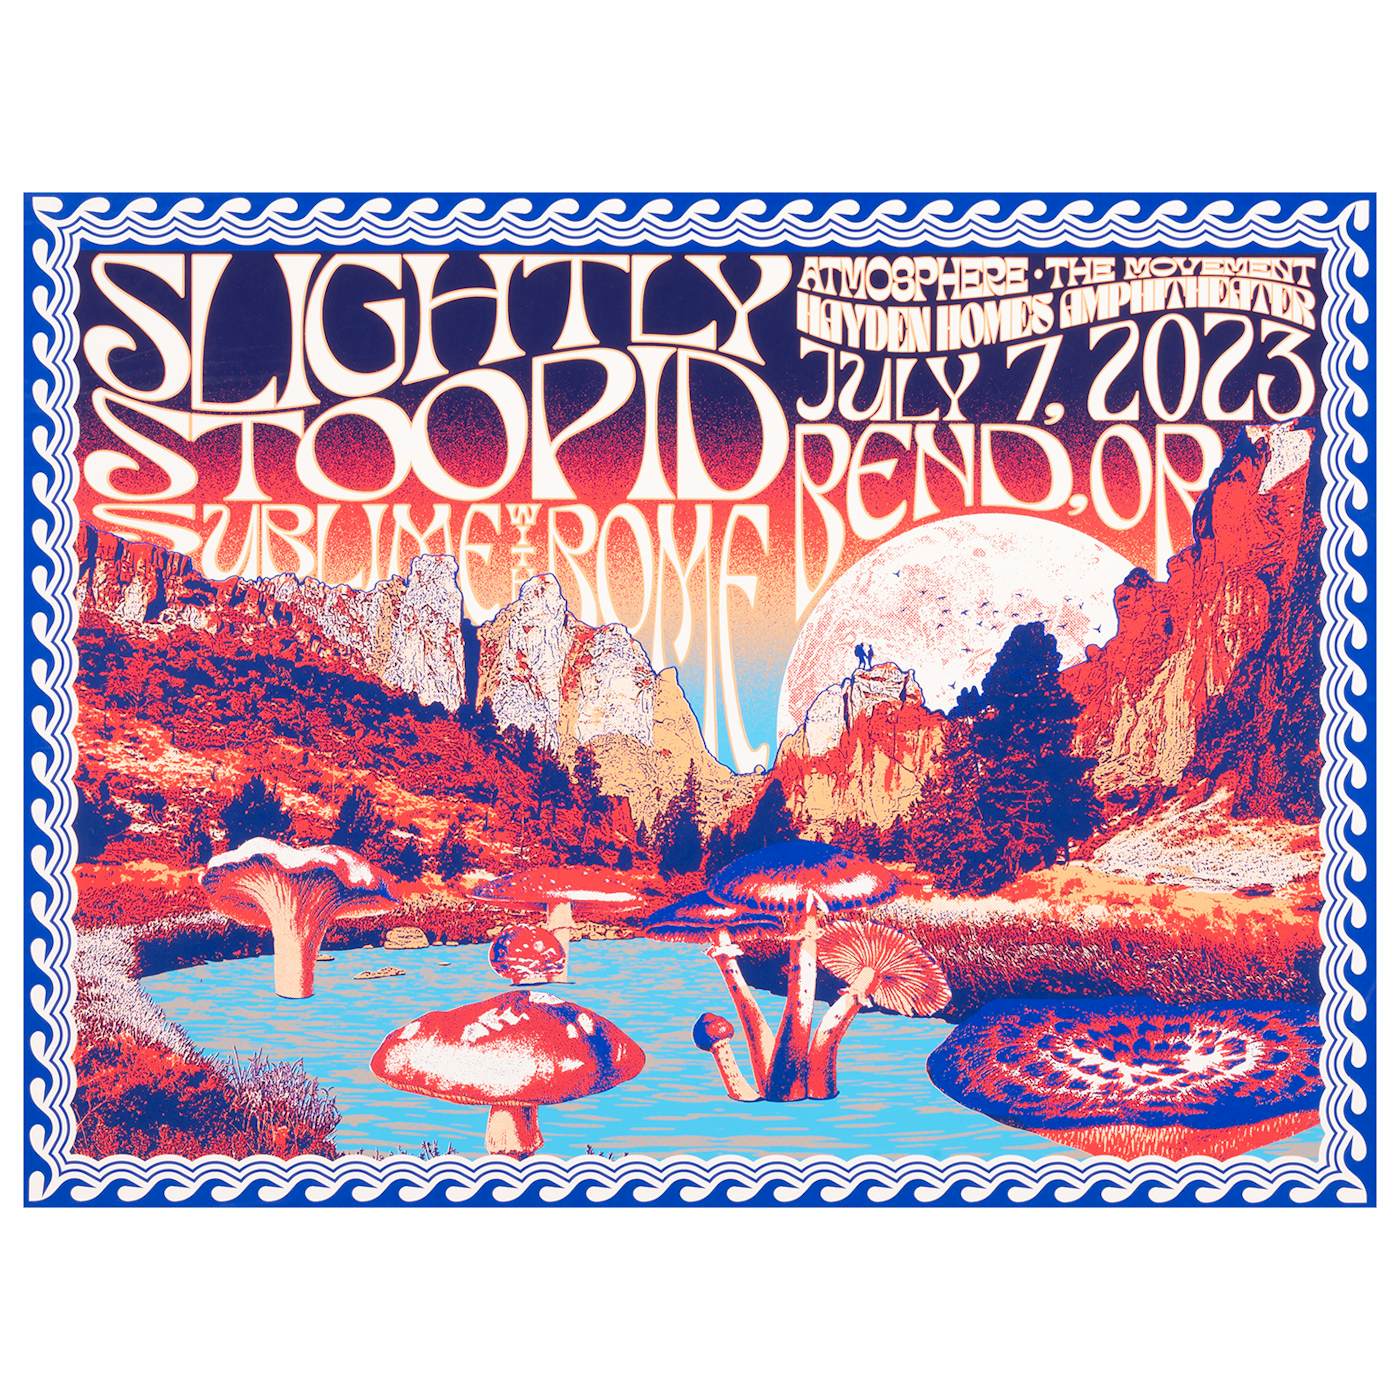 Slightly Stoopid 7/7/23 Bend, OR Show Poster by Zoca Studio